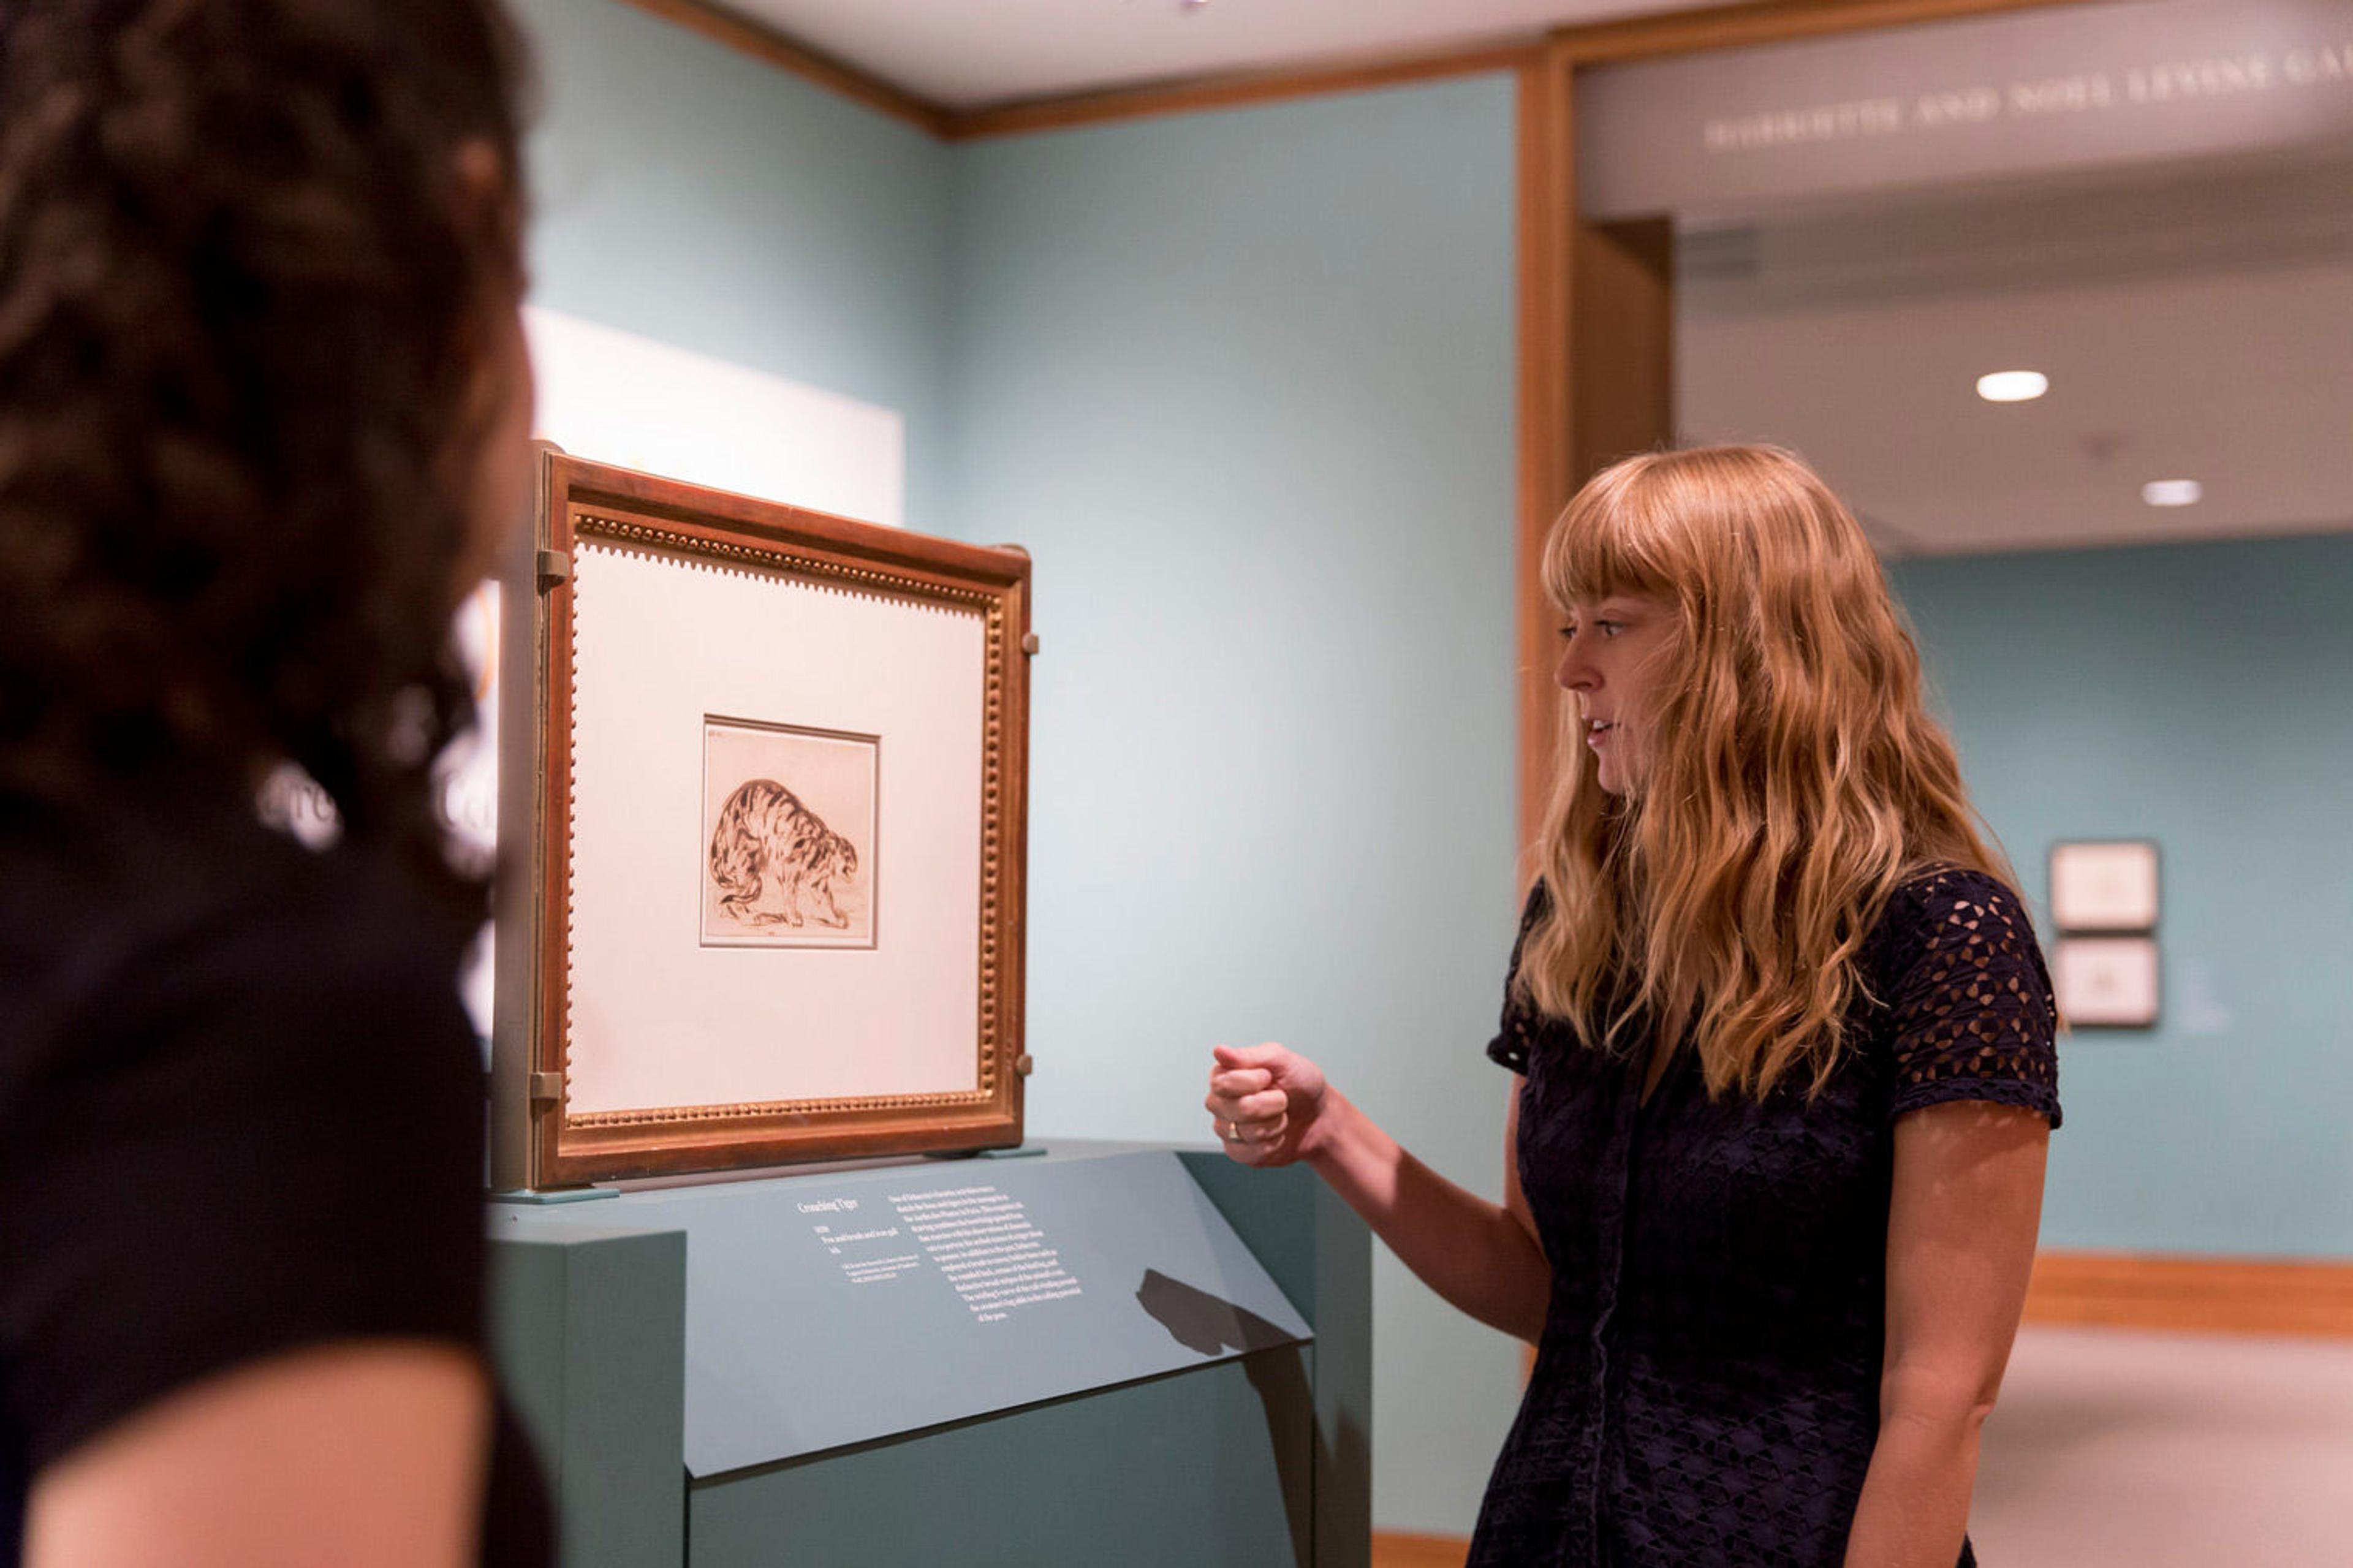 A female curator admires a drawing by Delacroix in a museum gallery